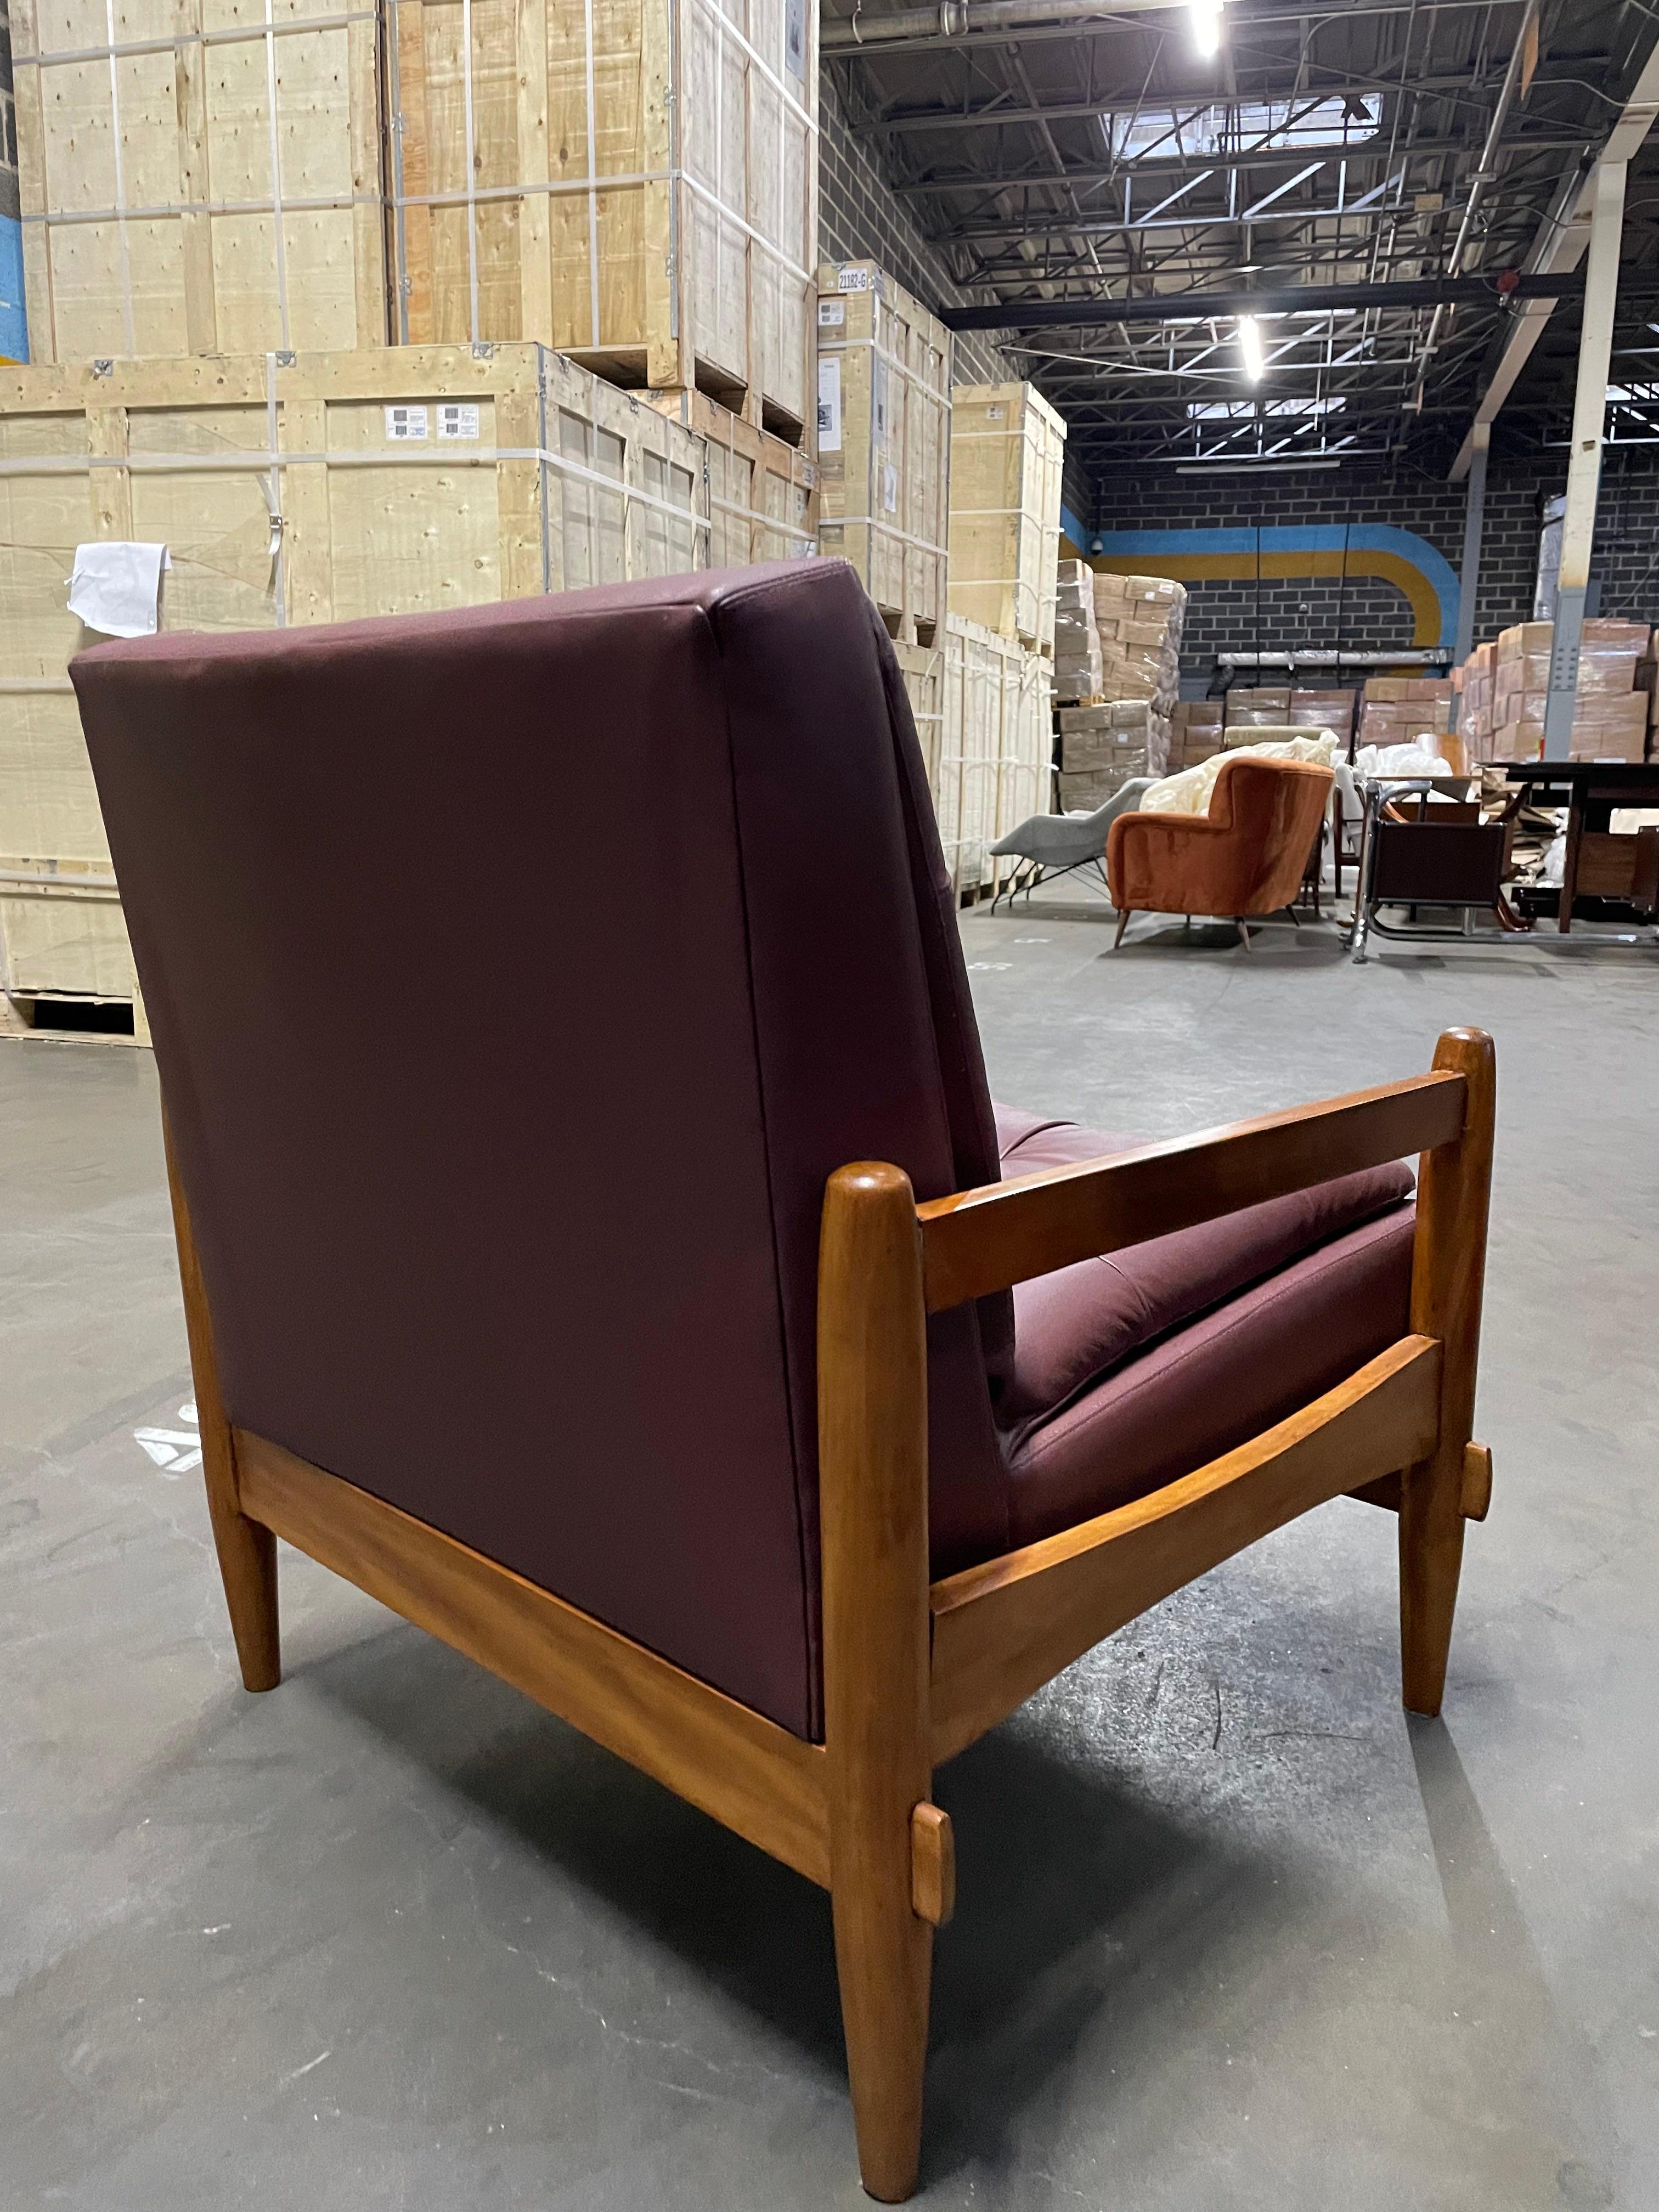 Hand-Crafted Brazilian Modern Armchair Pair in Purple Leather & Hardwood, Cimo, Brazil, 1960 For Sale